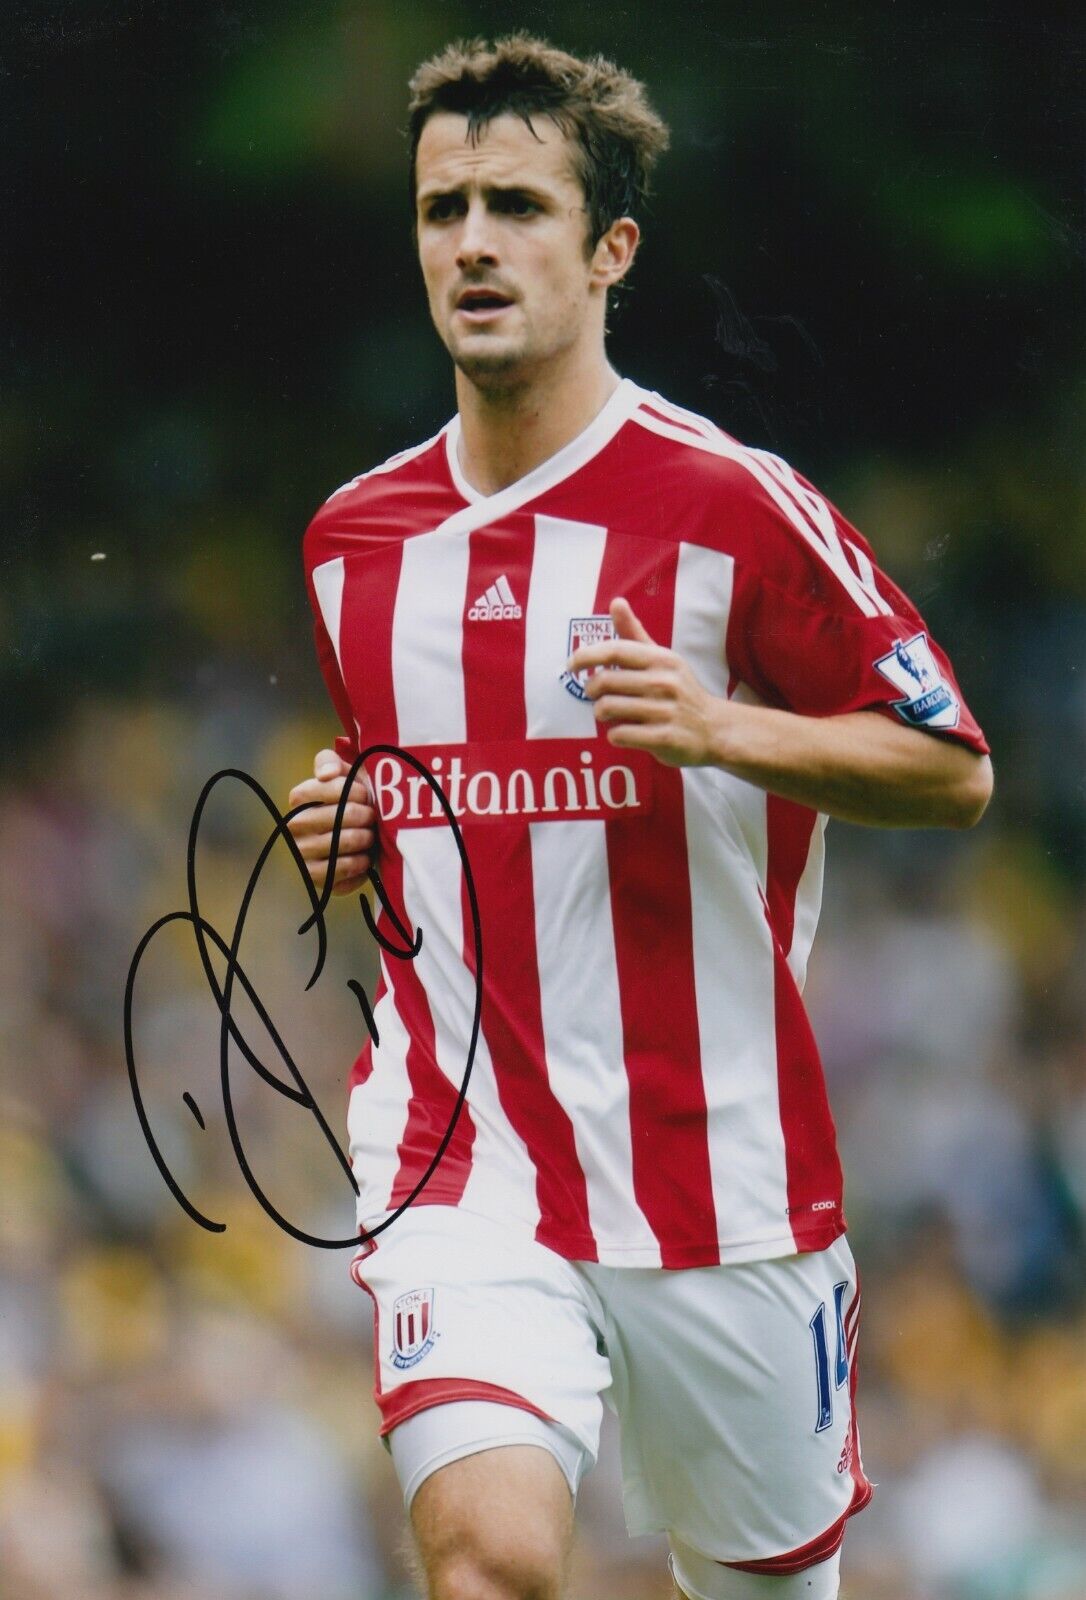 Danny Pugh Hand Signed 12x8 Photo Poster painting - Stoke City - Football Autograph.